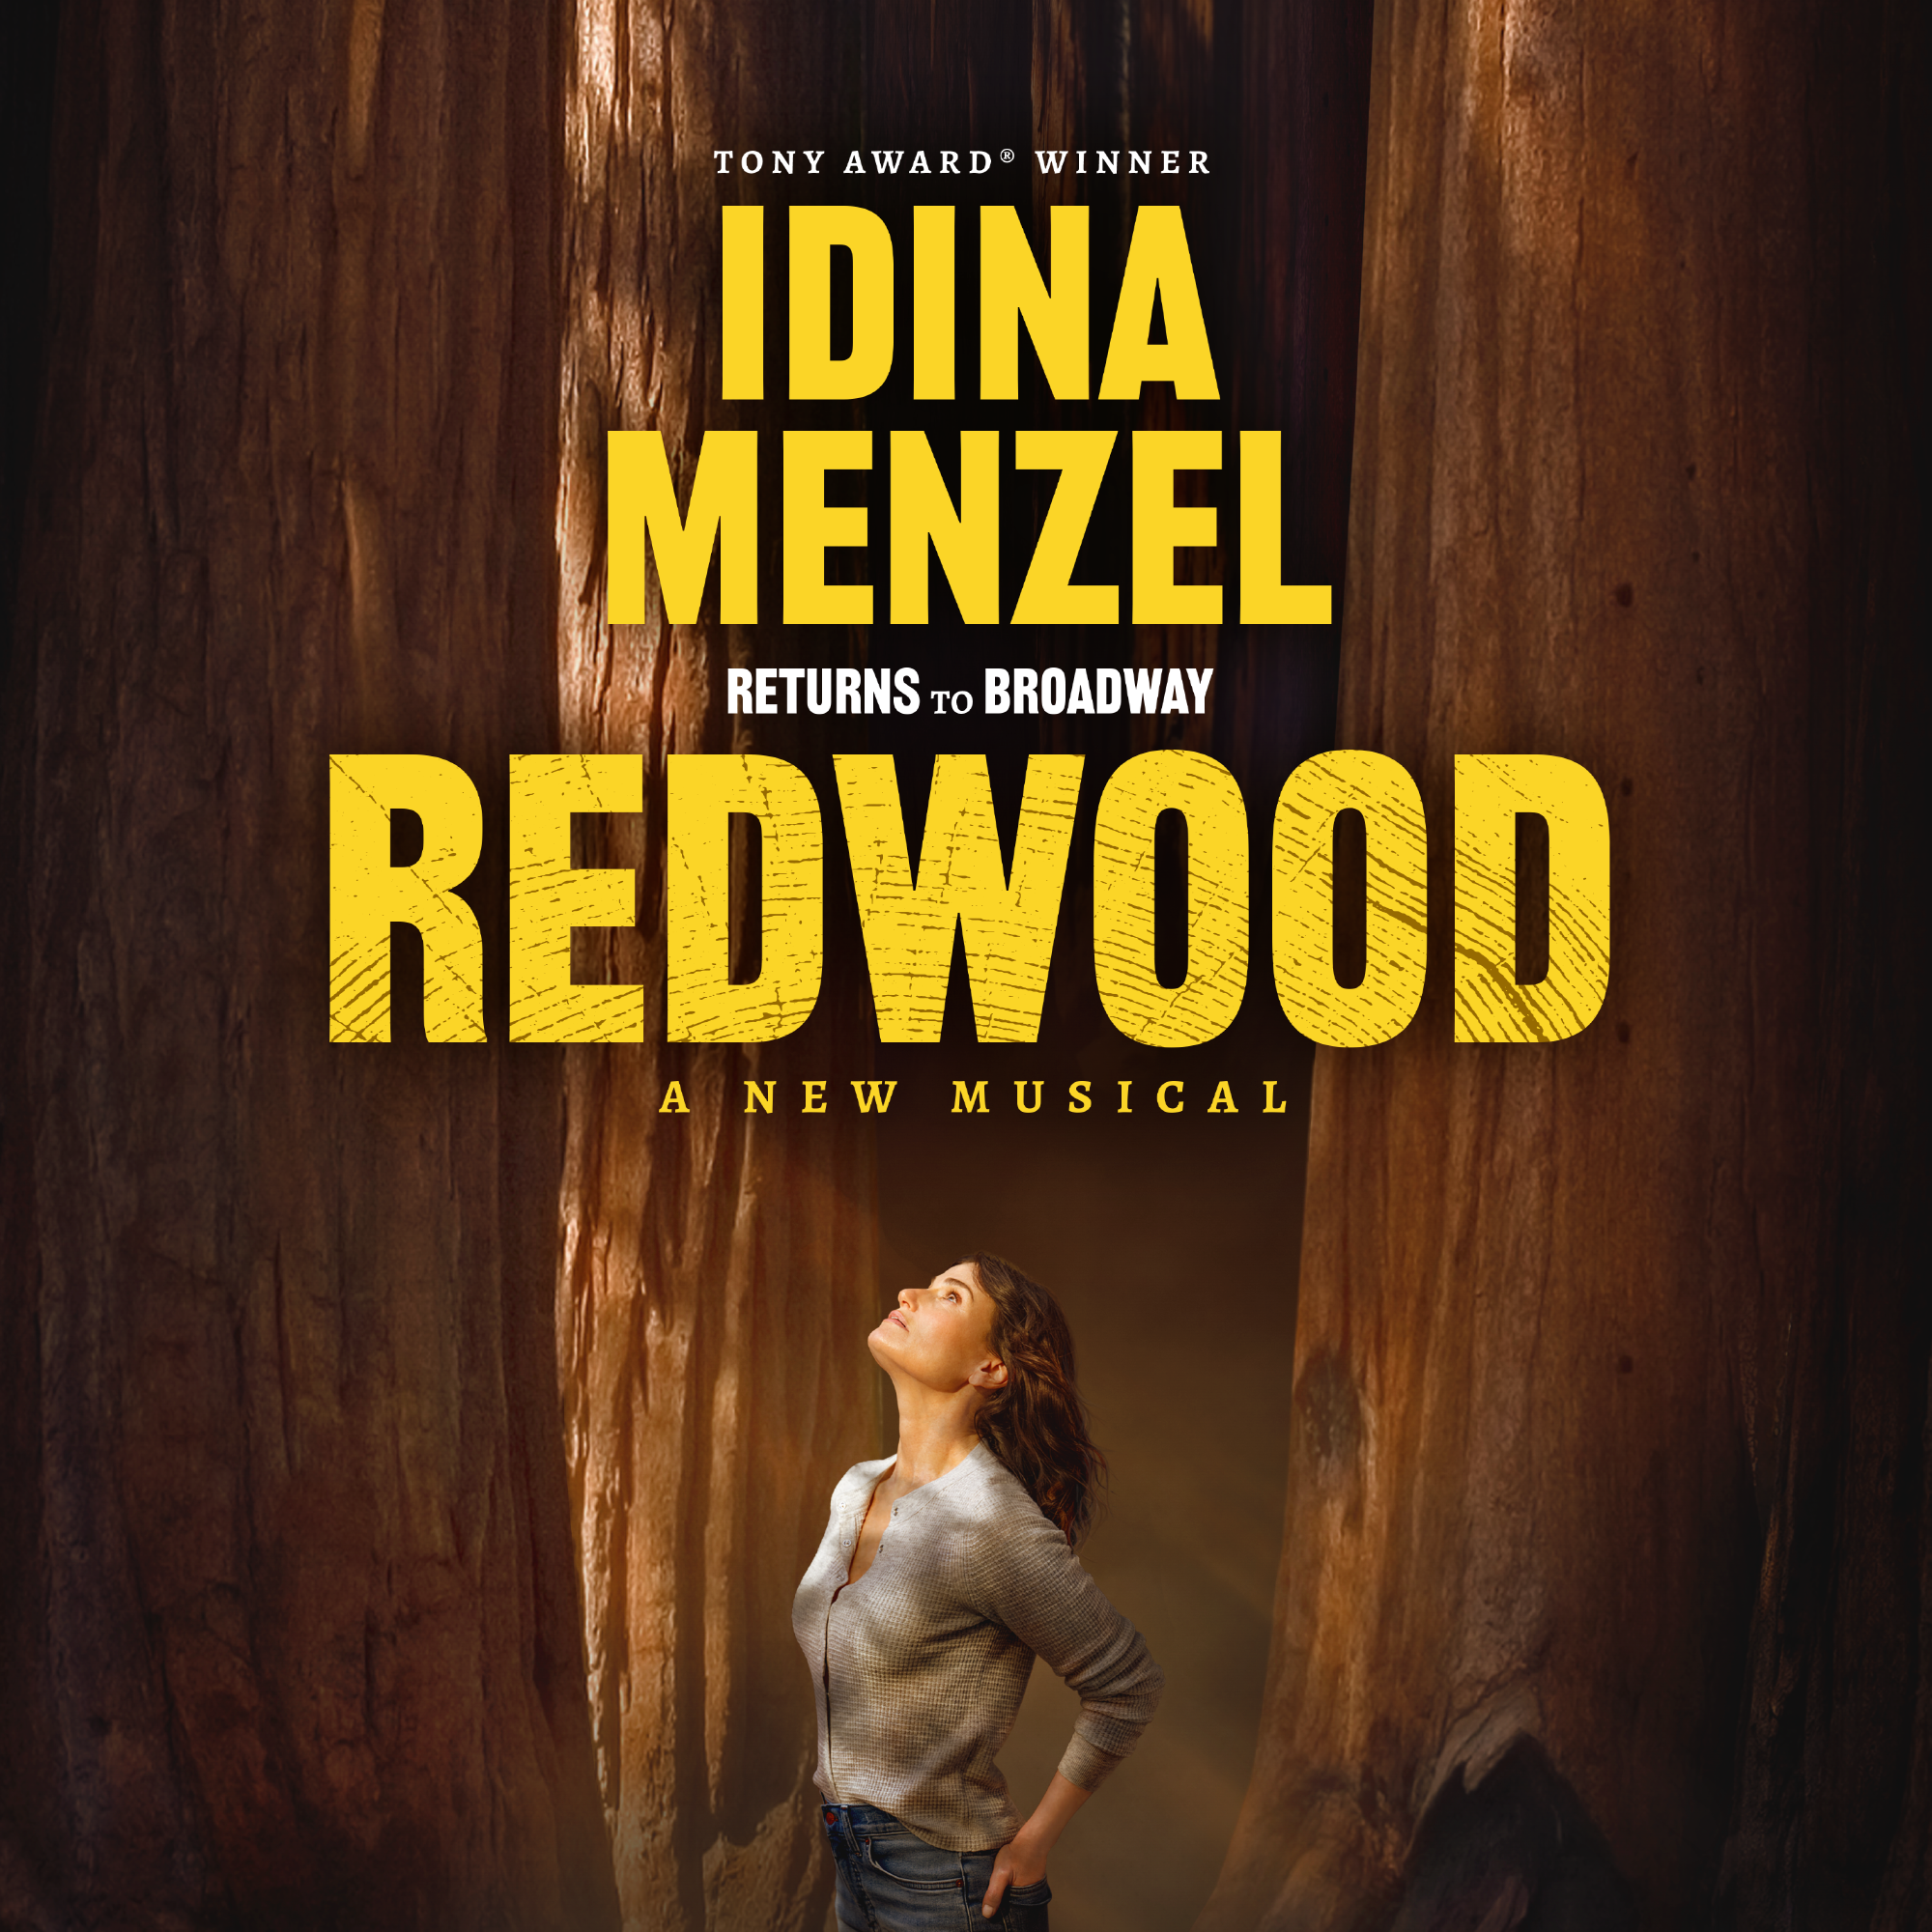 Artwork for REDWOOD, Idina standing among redwood trees gazing up at text that reads Tony Award Winner Idina Menzel Returns to Broadway in Redwood A New Musical.